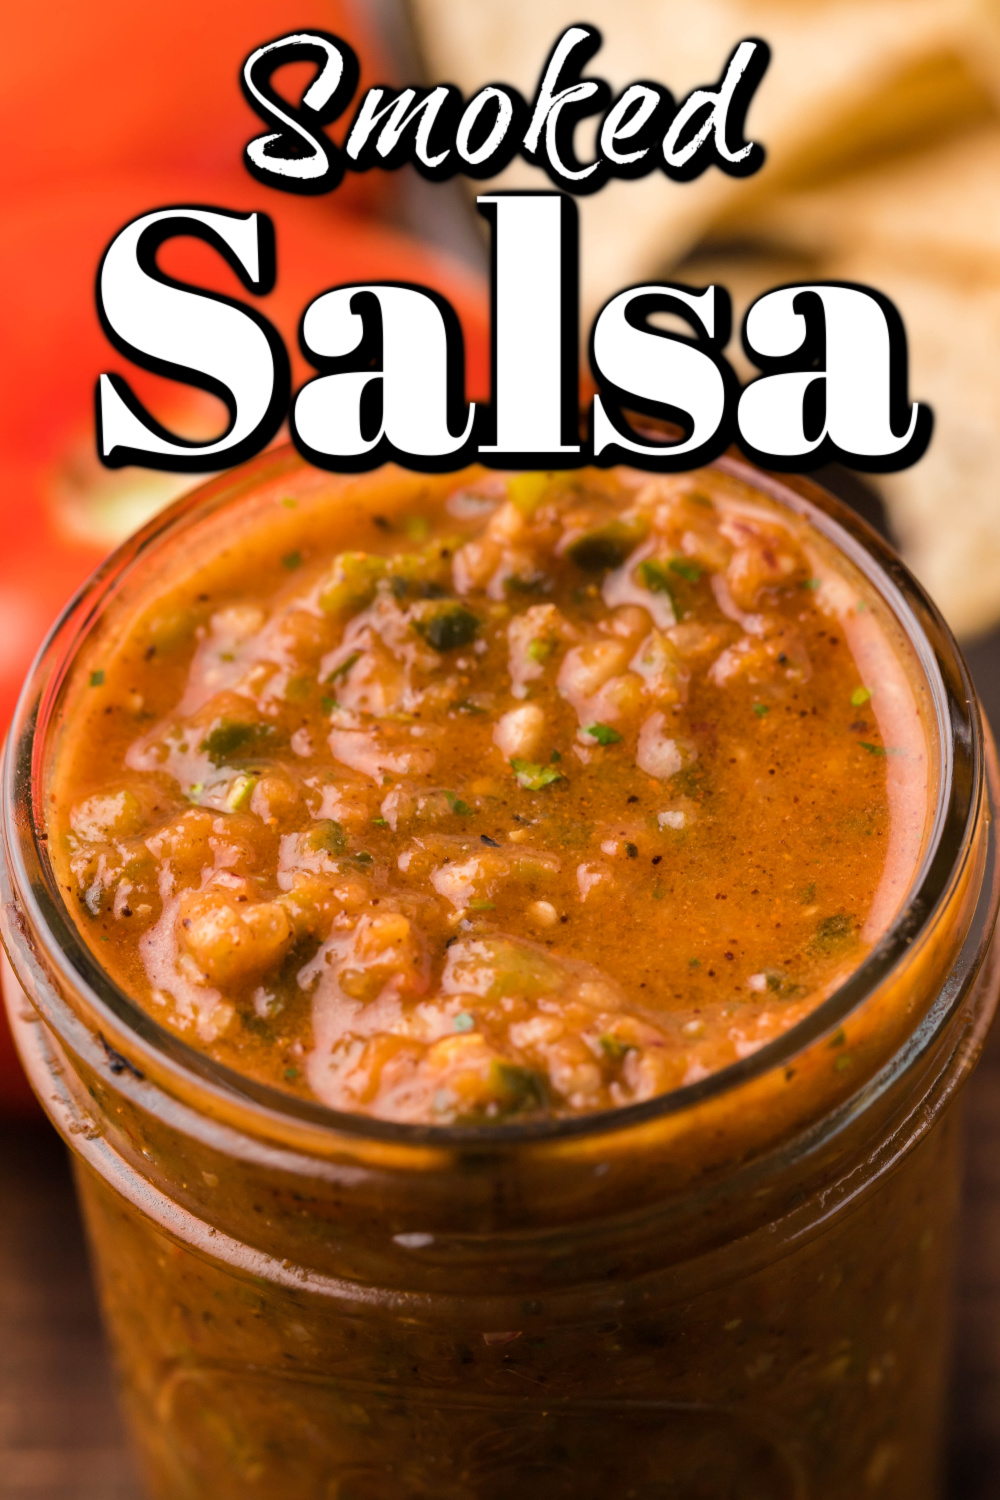 This smoked salsa takes your everyday salsa and knocks it up to 11! If you love salsa, you owe it to yourself to try this homemade smoked salsa recipe!